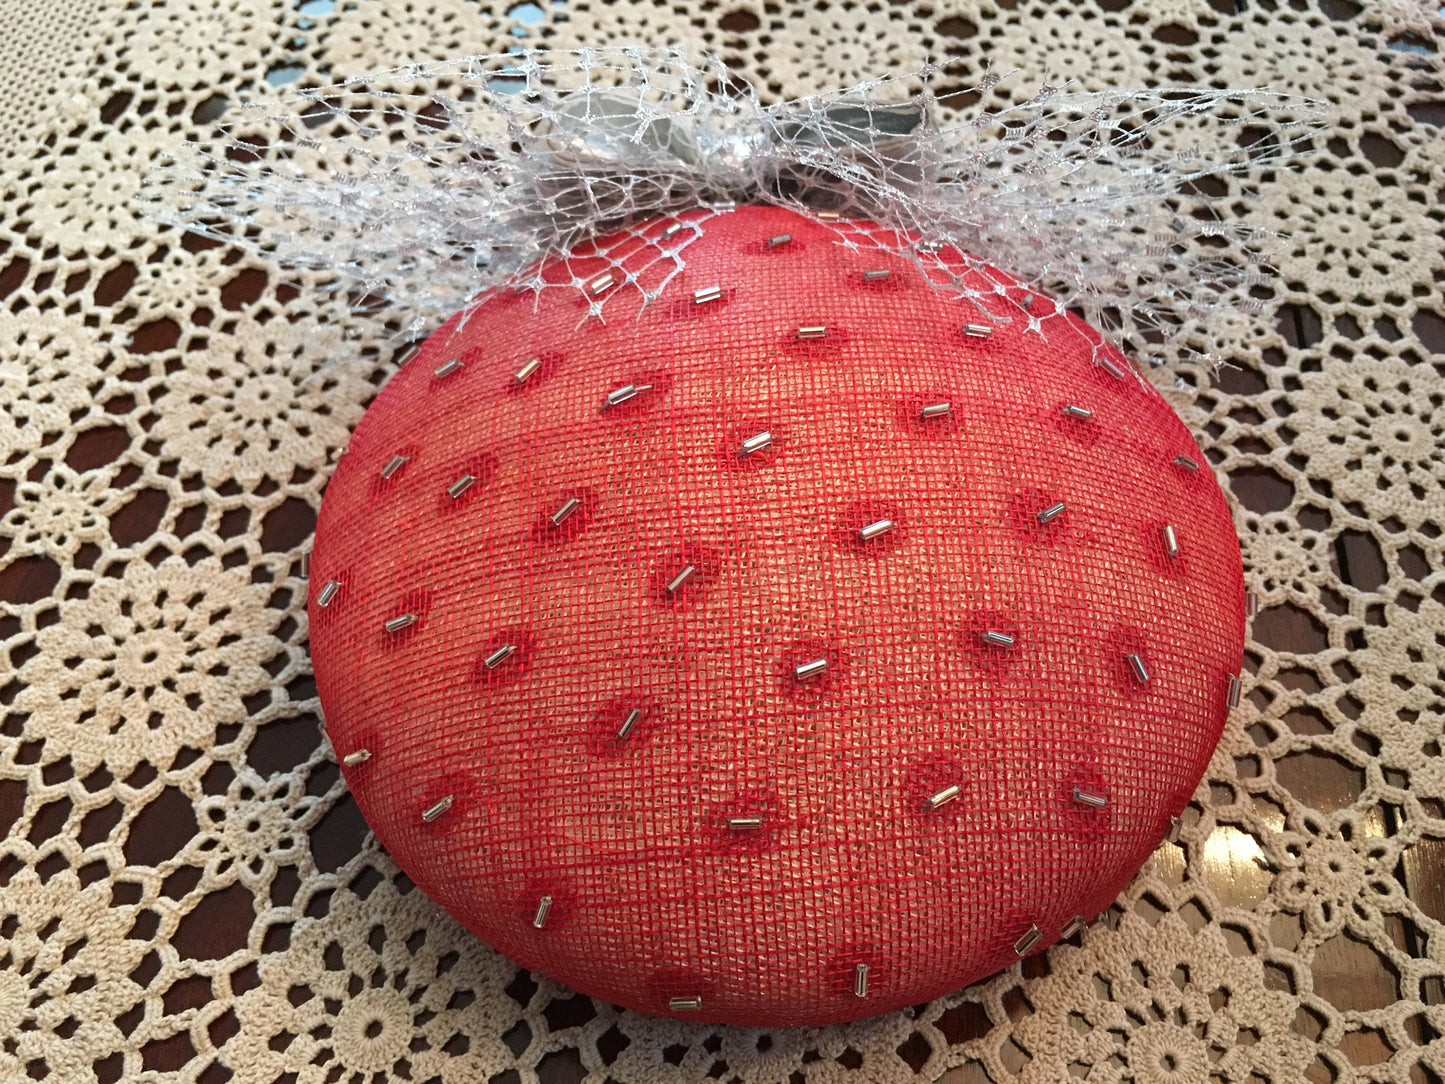 Red and Silver Leather Pill Box Sinamay Hat-Party-Christmas-Racetrack Hat-Royal Ascot Hat-Preakness-Belmount-Christening-Wedding-Bride-Red !